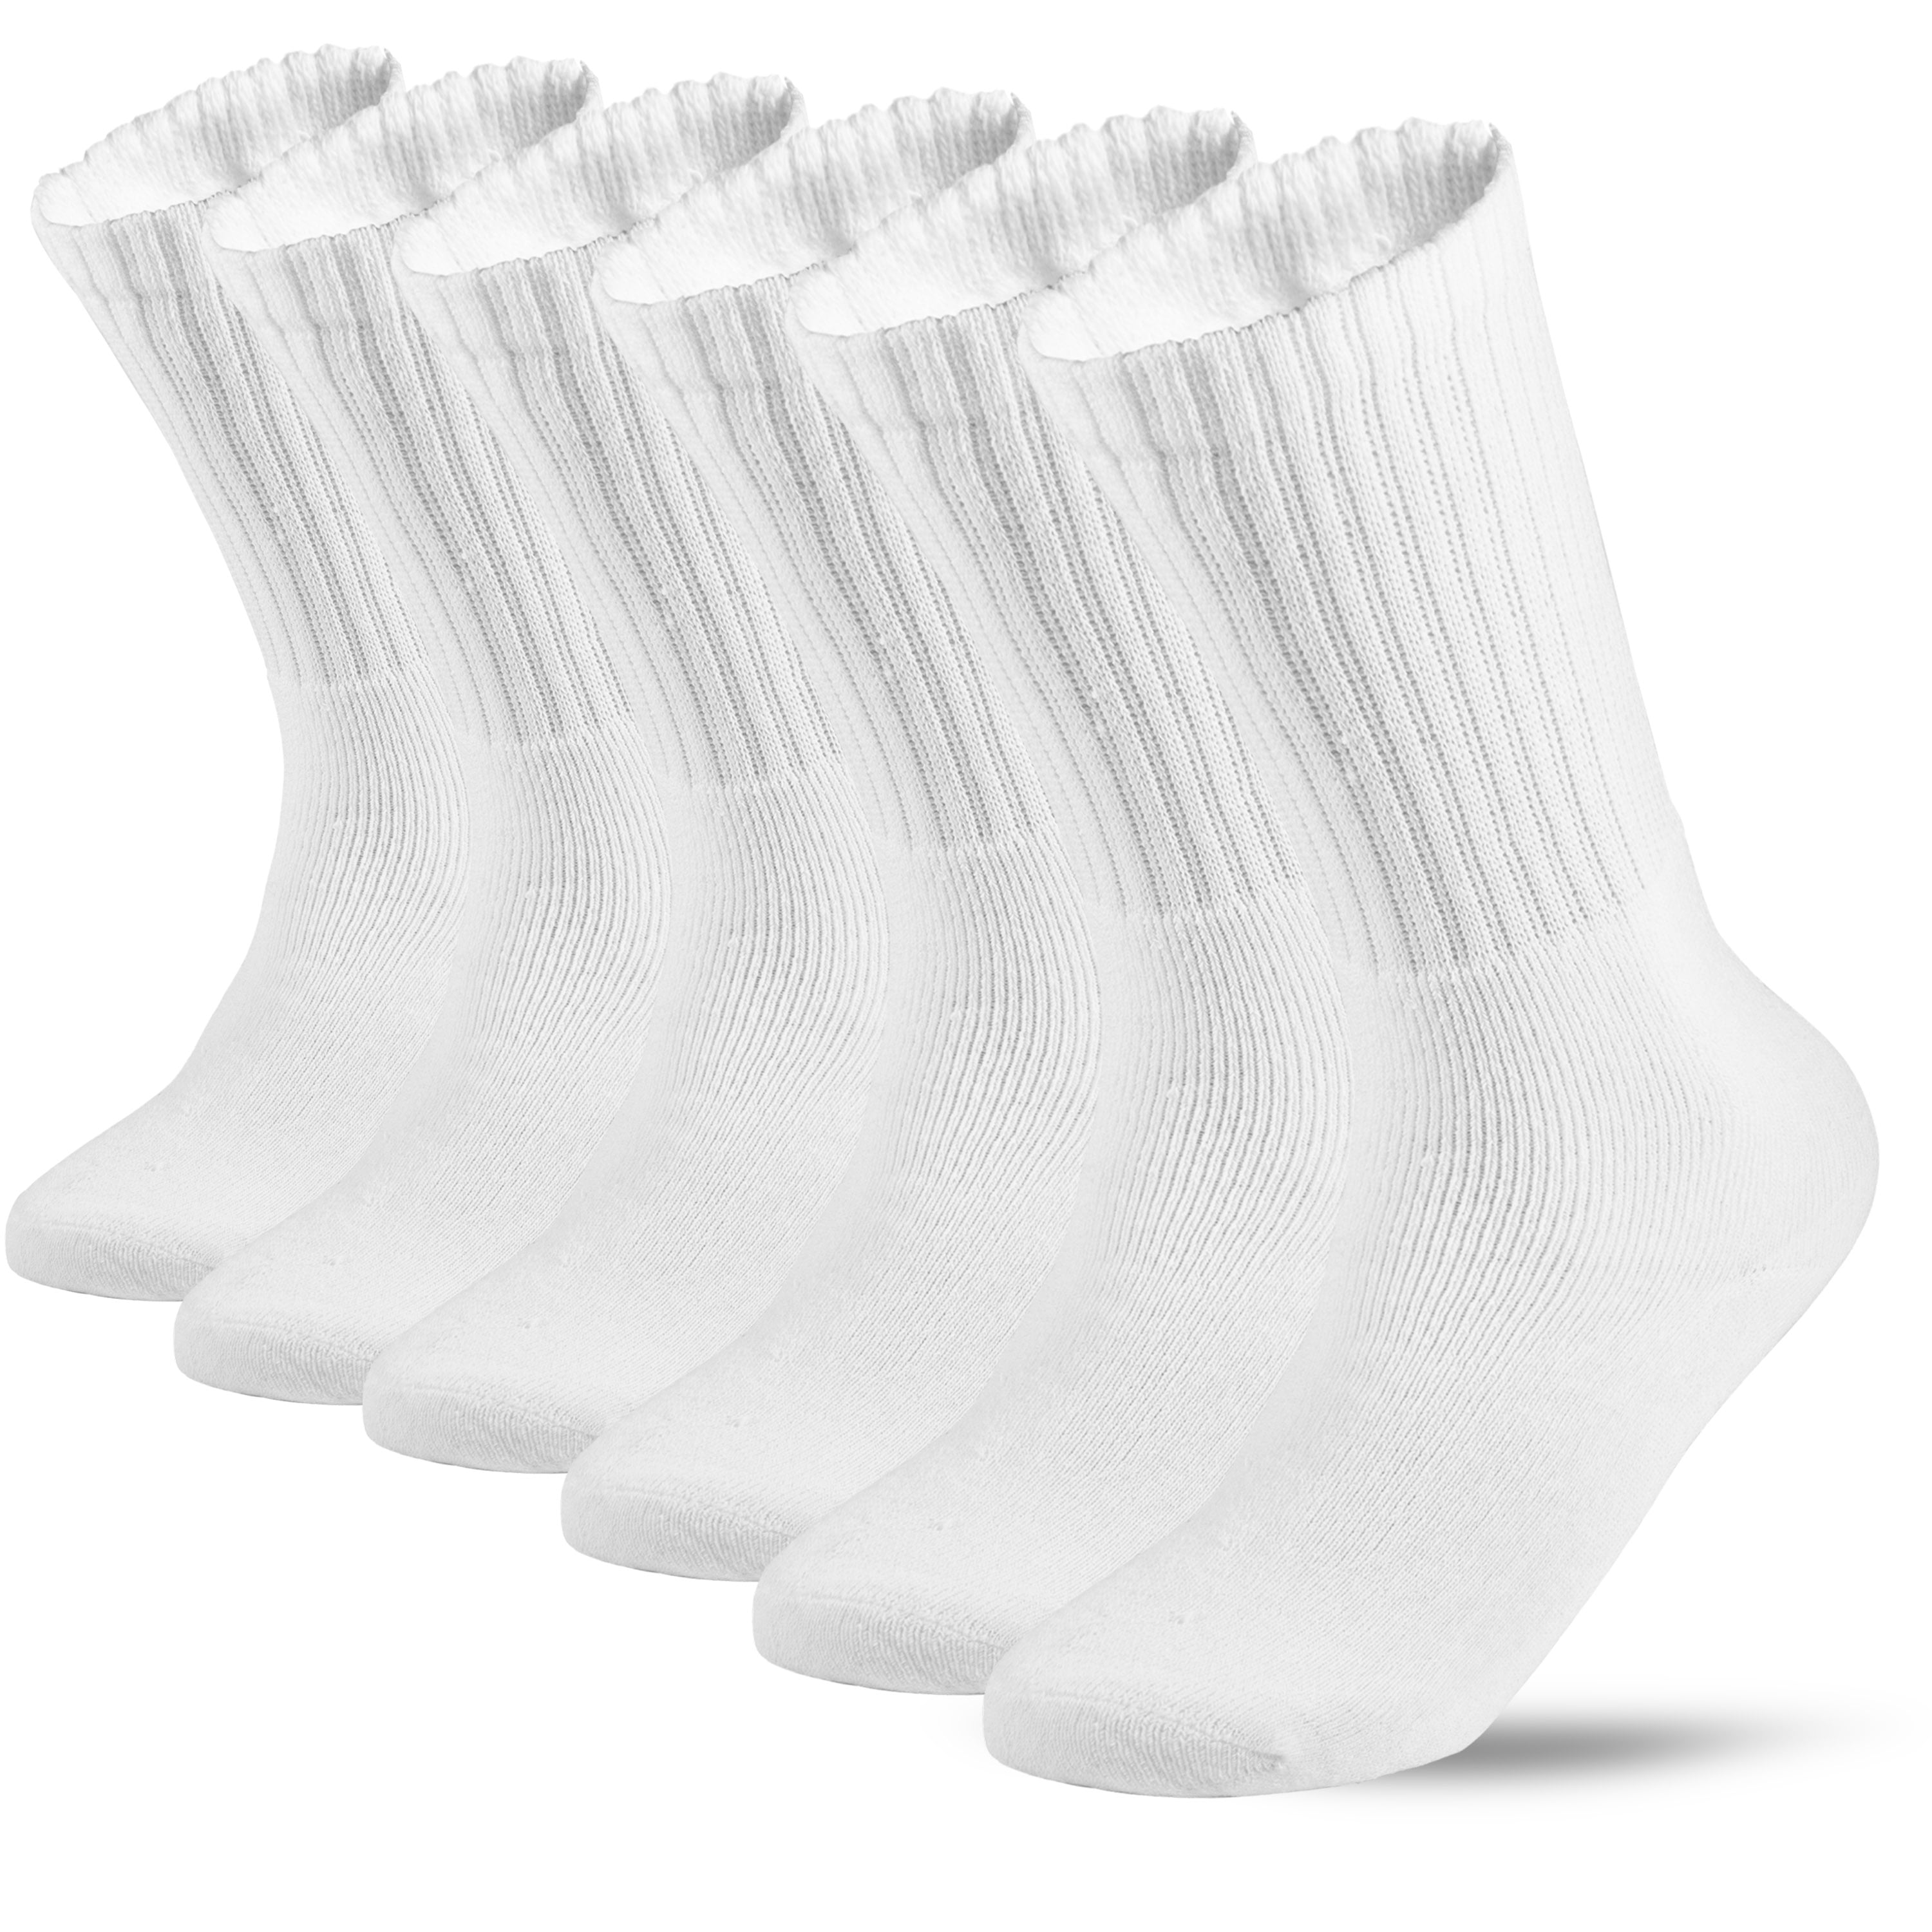 6 Pairs Men S Athletic Cotton Casual Crew Solid Sport Socks White Size 10 13